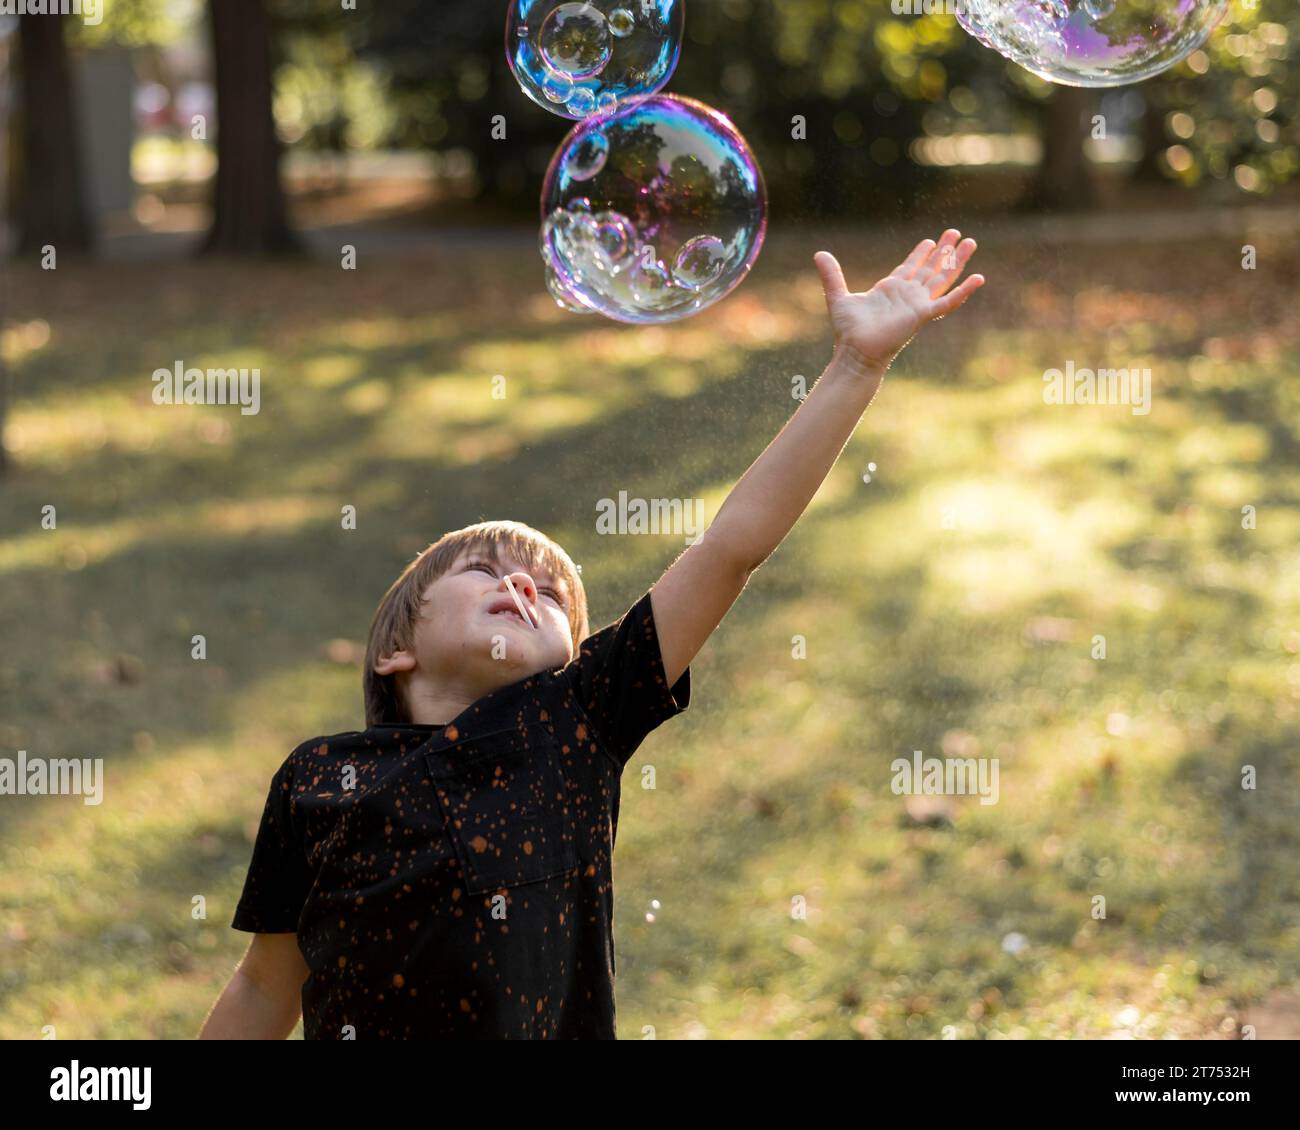 Kid trying catch soap bubbles Stock Photo